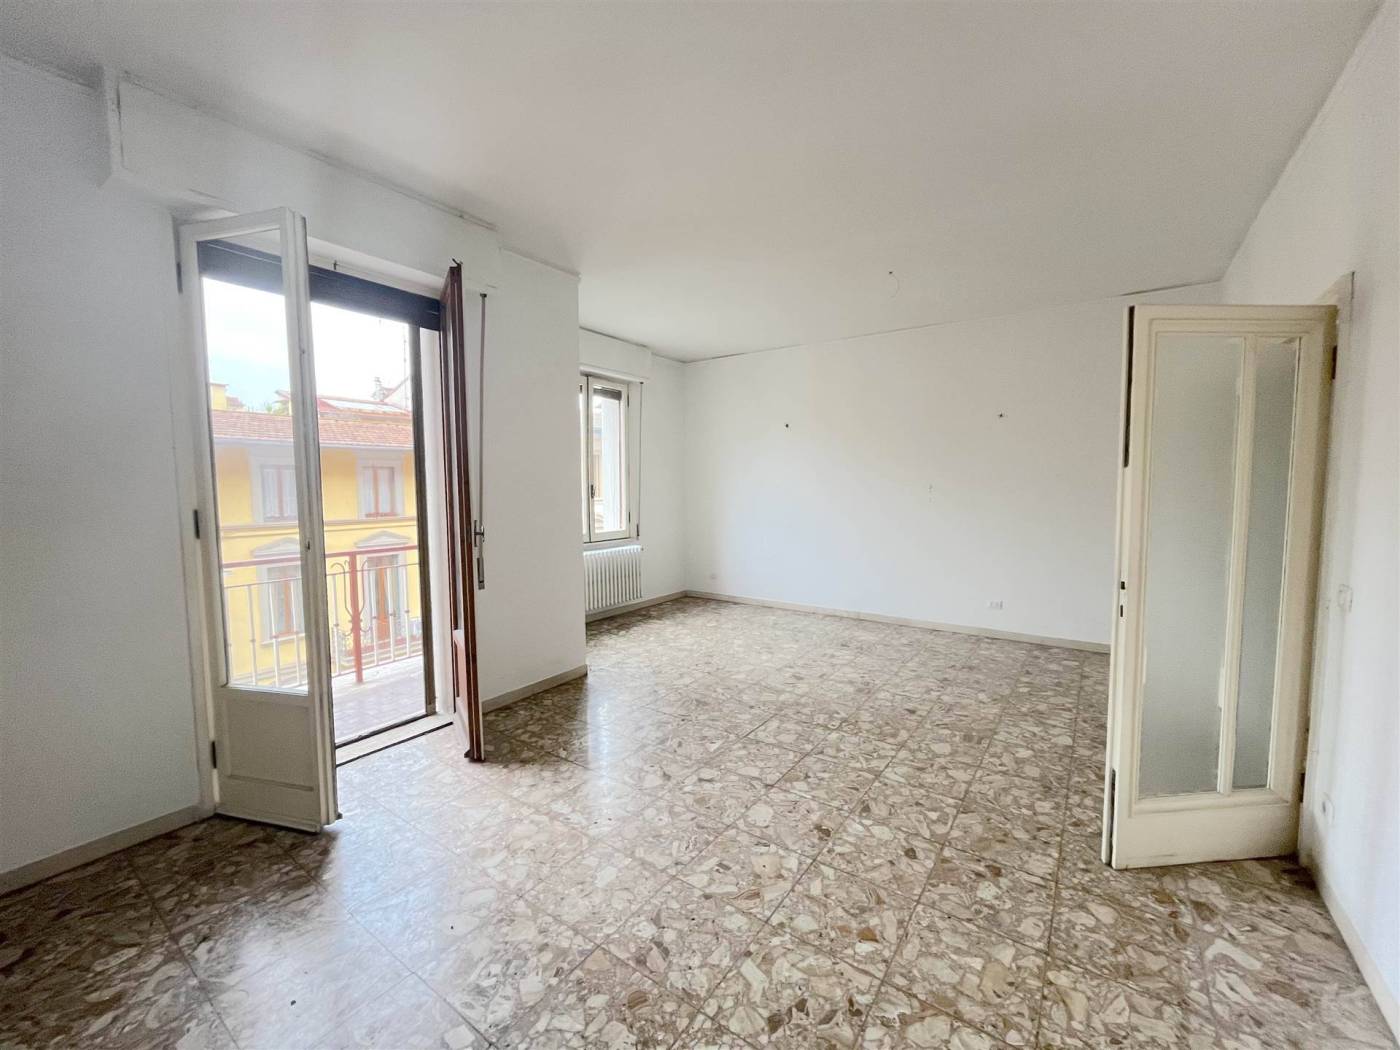 REF: AF5ROMA, FLORENCE, MAZZINI Apartment 140 m2. Balcony/loggia. FREE Eu. 2,300 UNFURNISHED In an absolutely elegant and residential area, we offer 